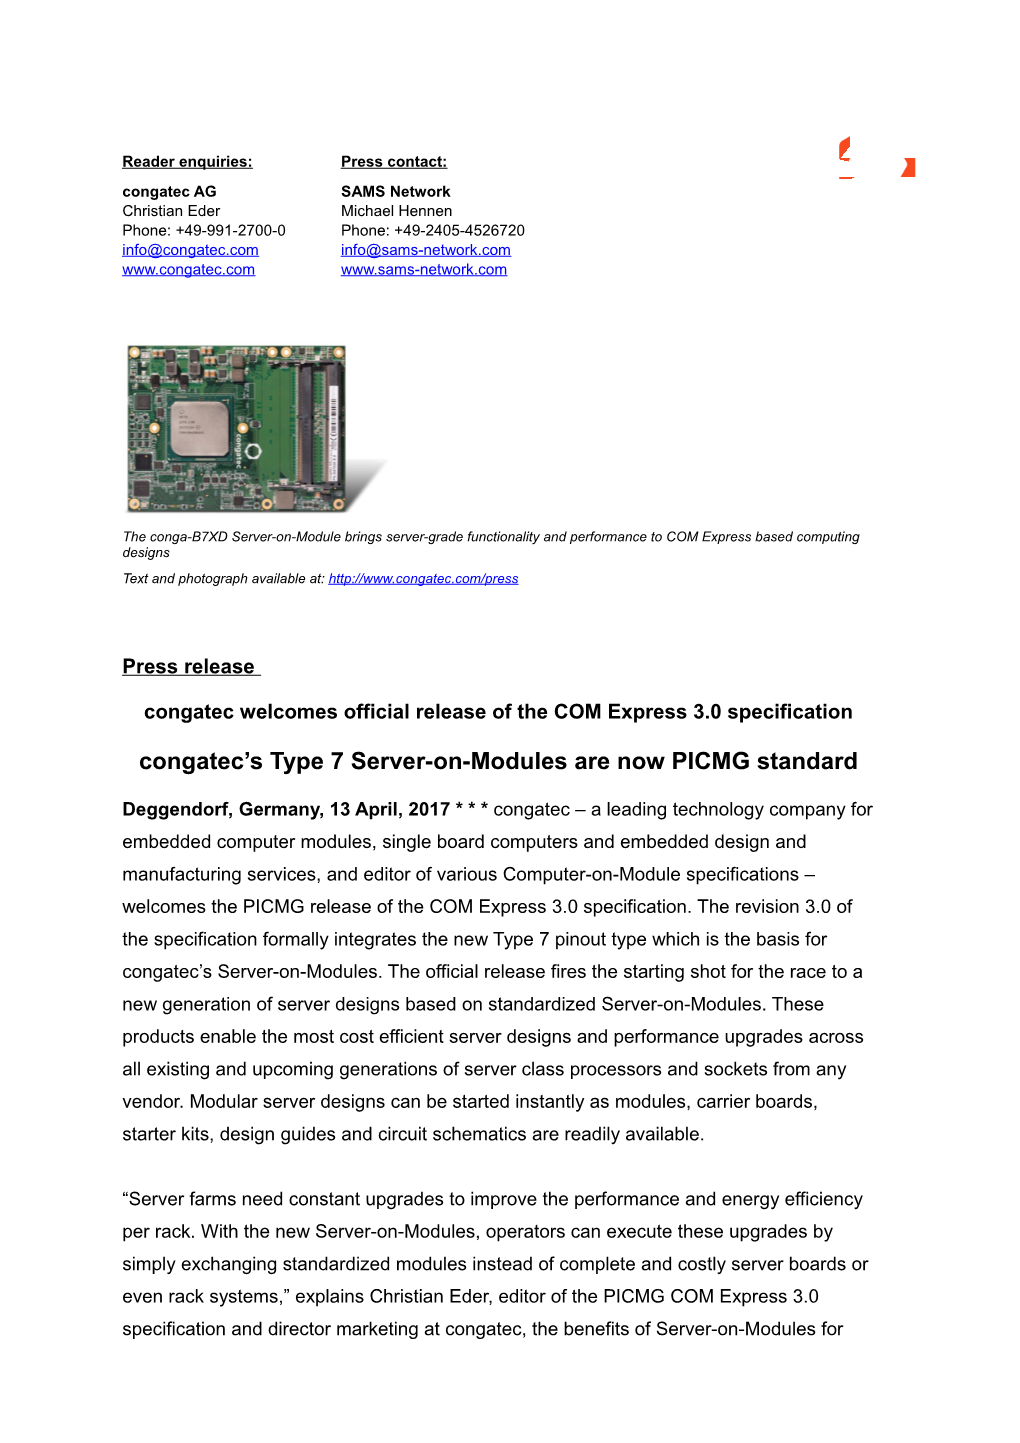 Congatec Welcomes Official Release of the COM Express 3.0 Specification